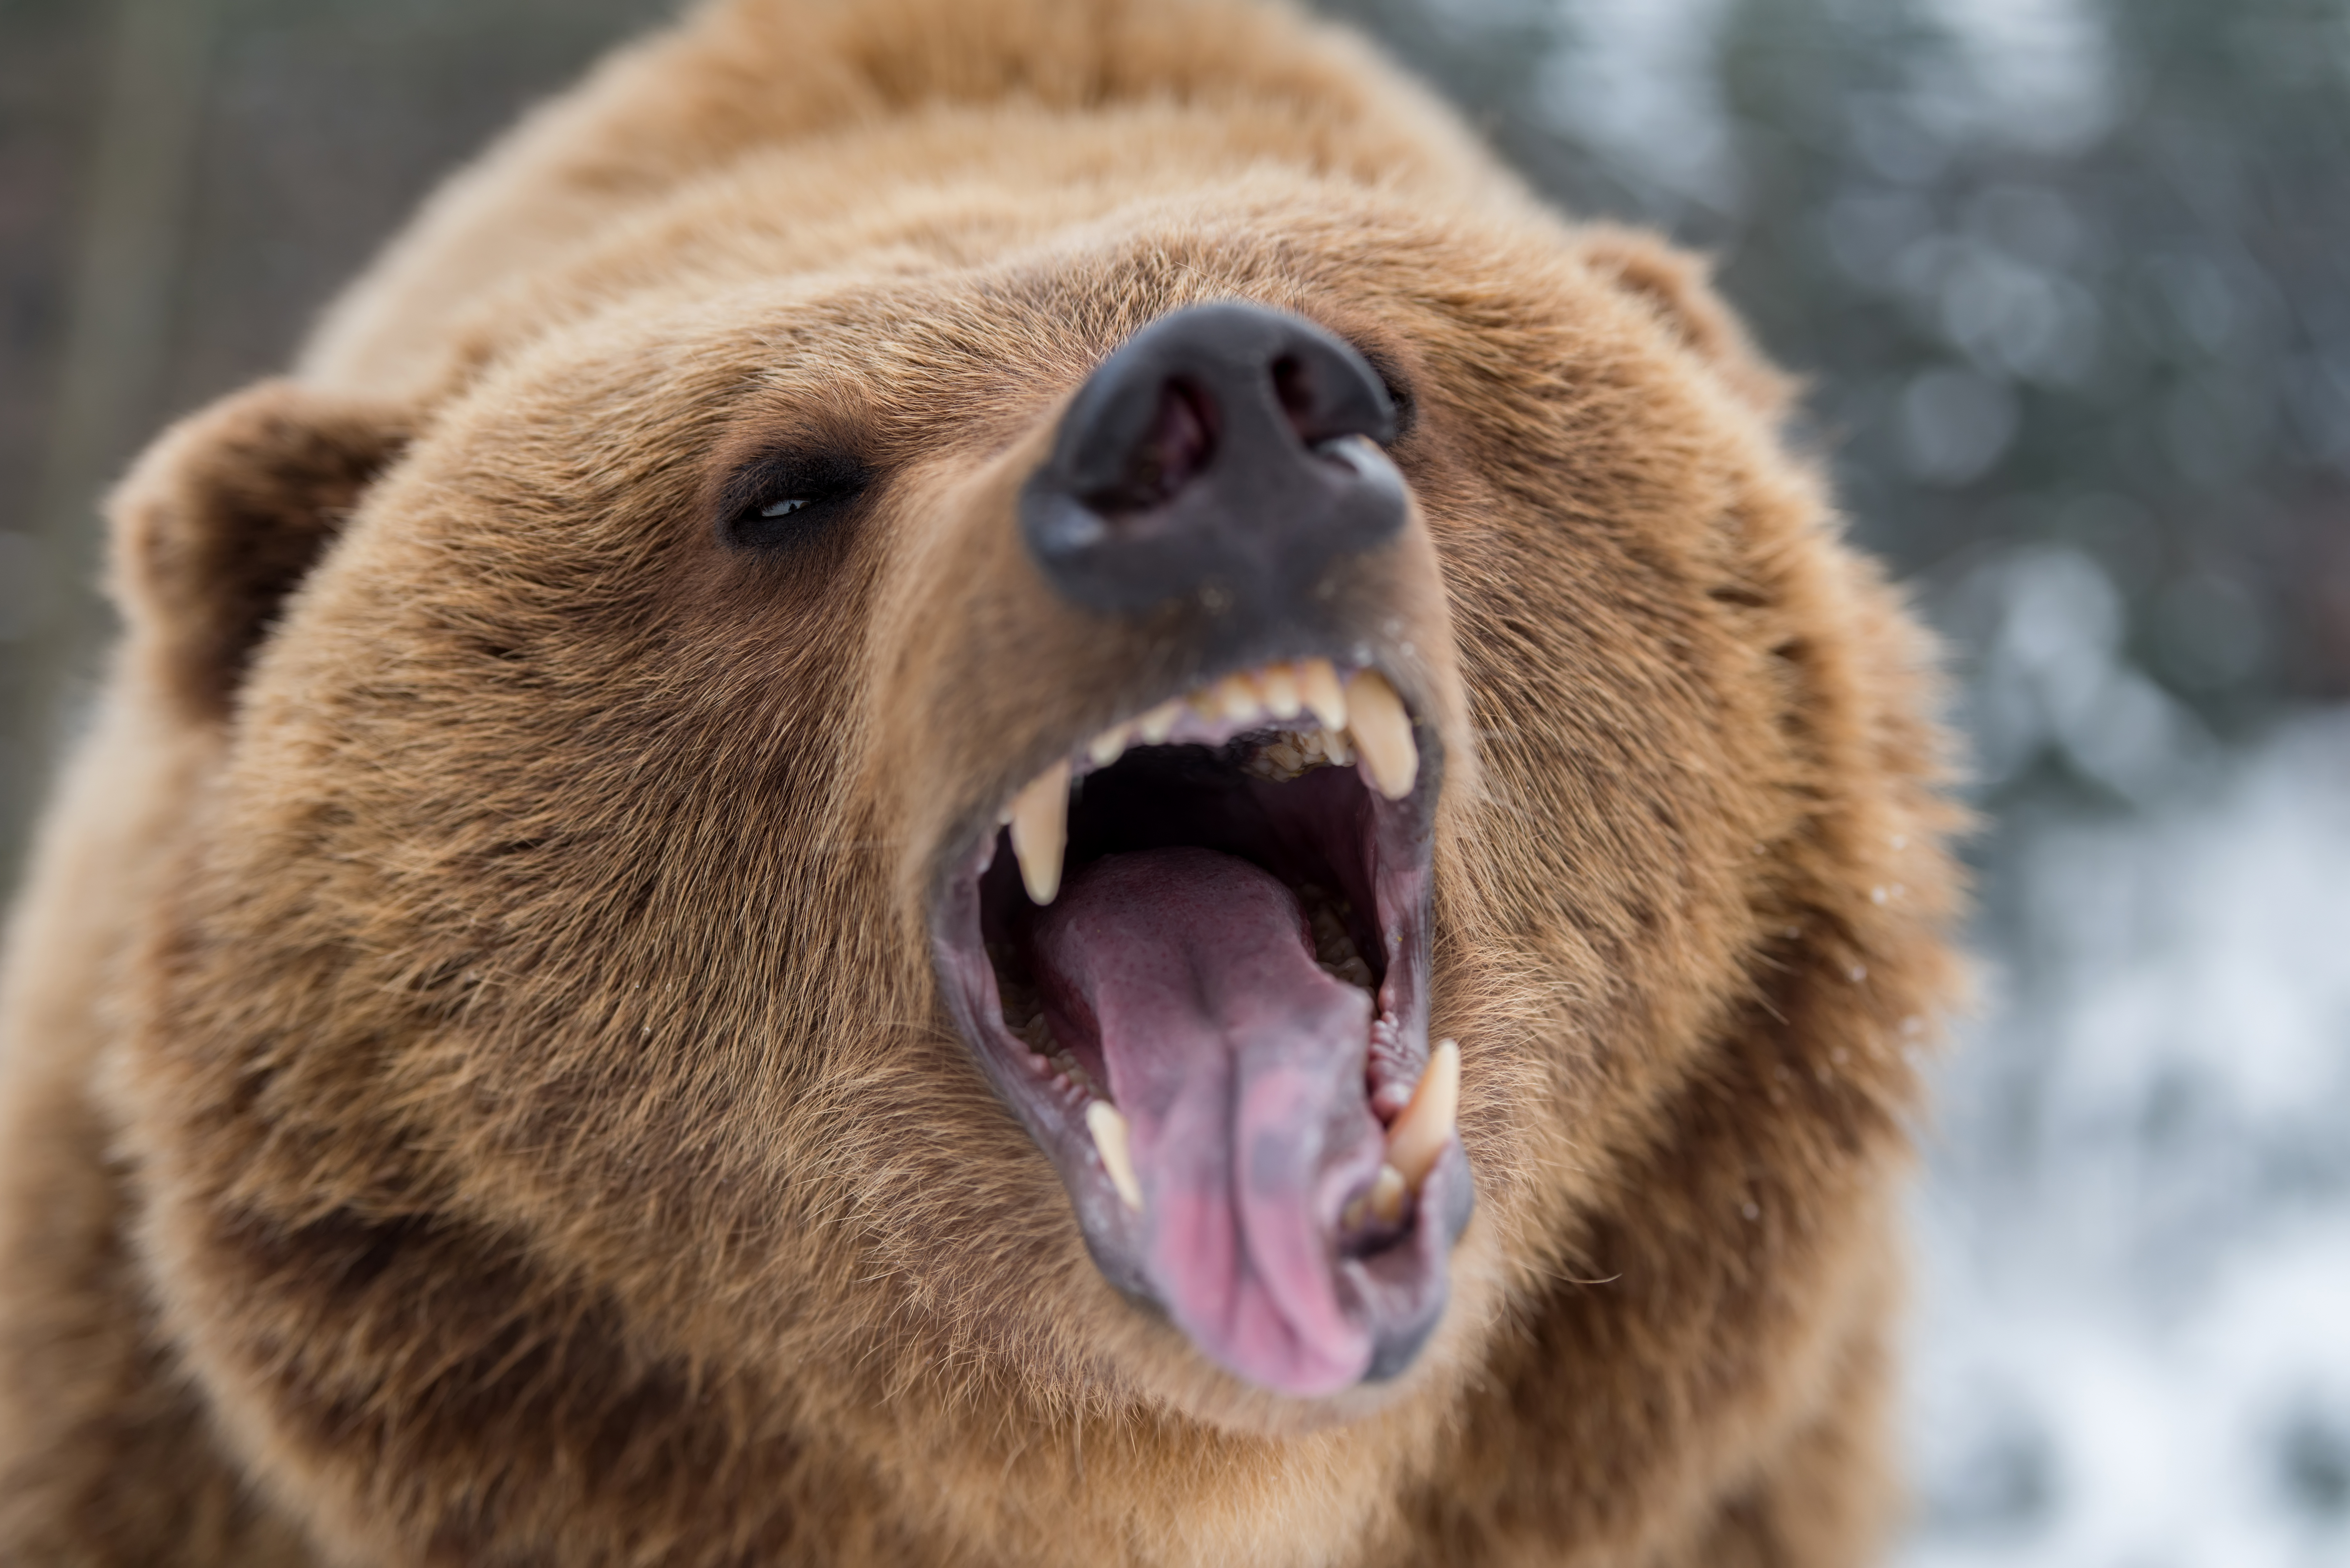 Does Pepper Spray Actually Work Against Bears? | Time